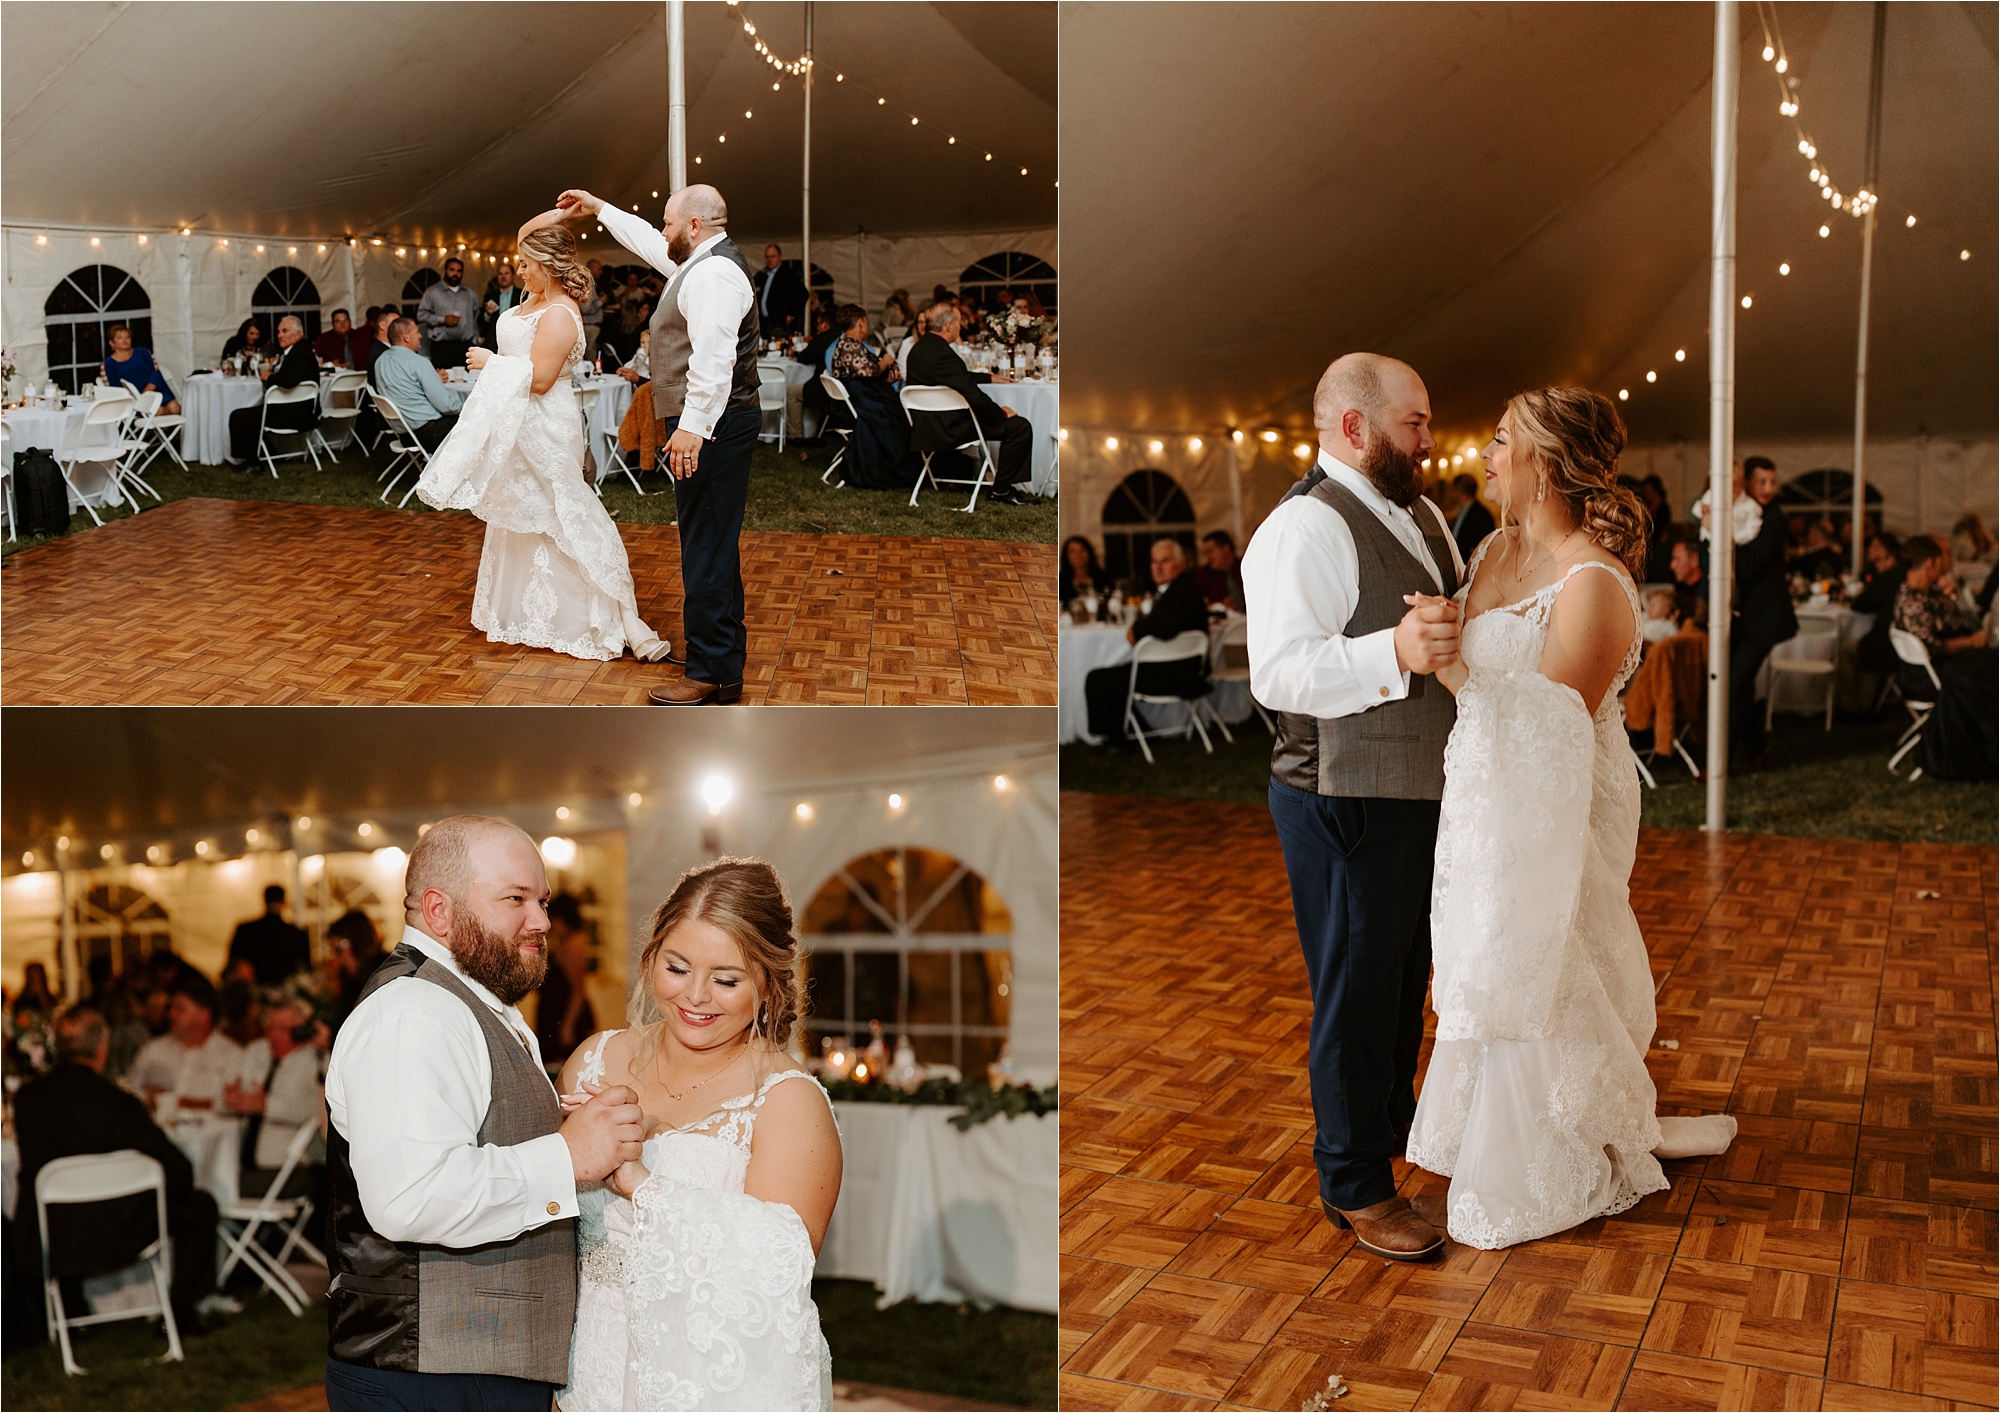 Bride and Groom First Dance - Tent Reception. Chicago Wedding Photographer